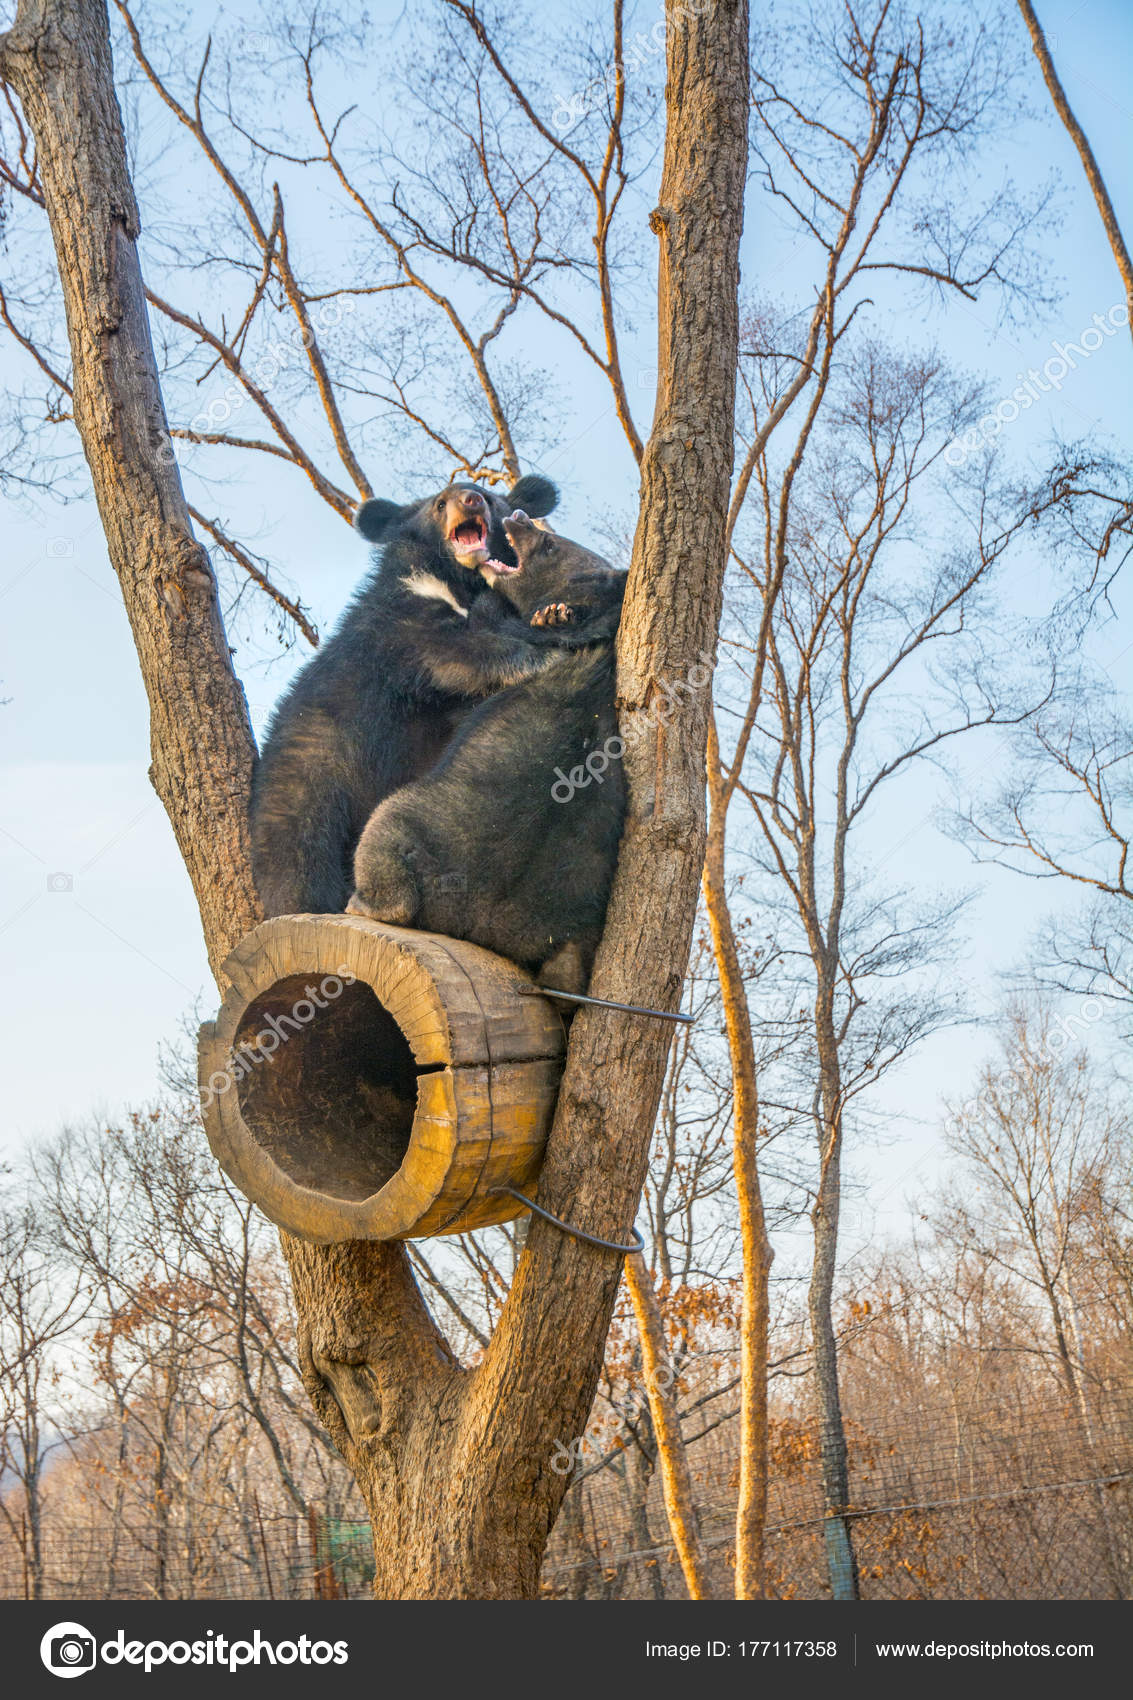 bear cubs play in a tree, climbed high on the branches and a cute ...